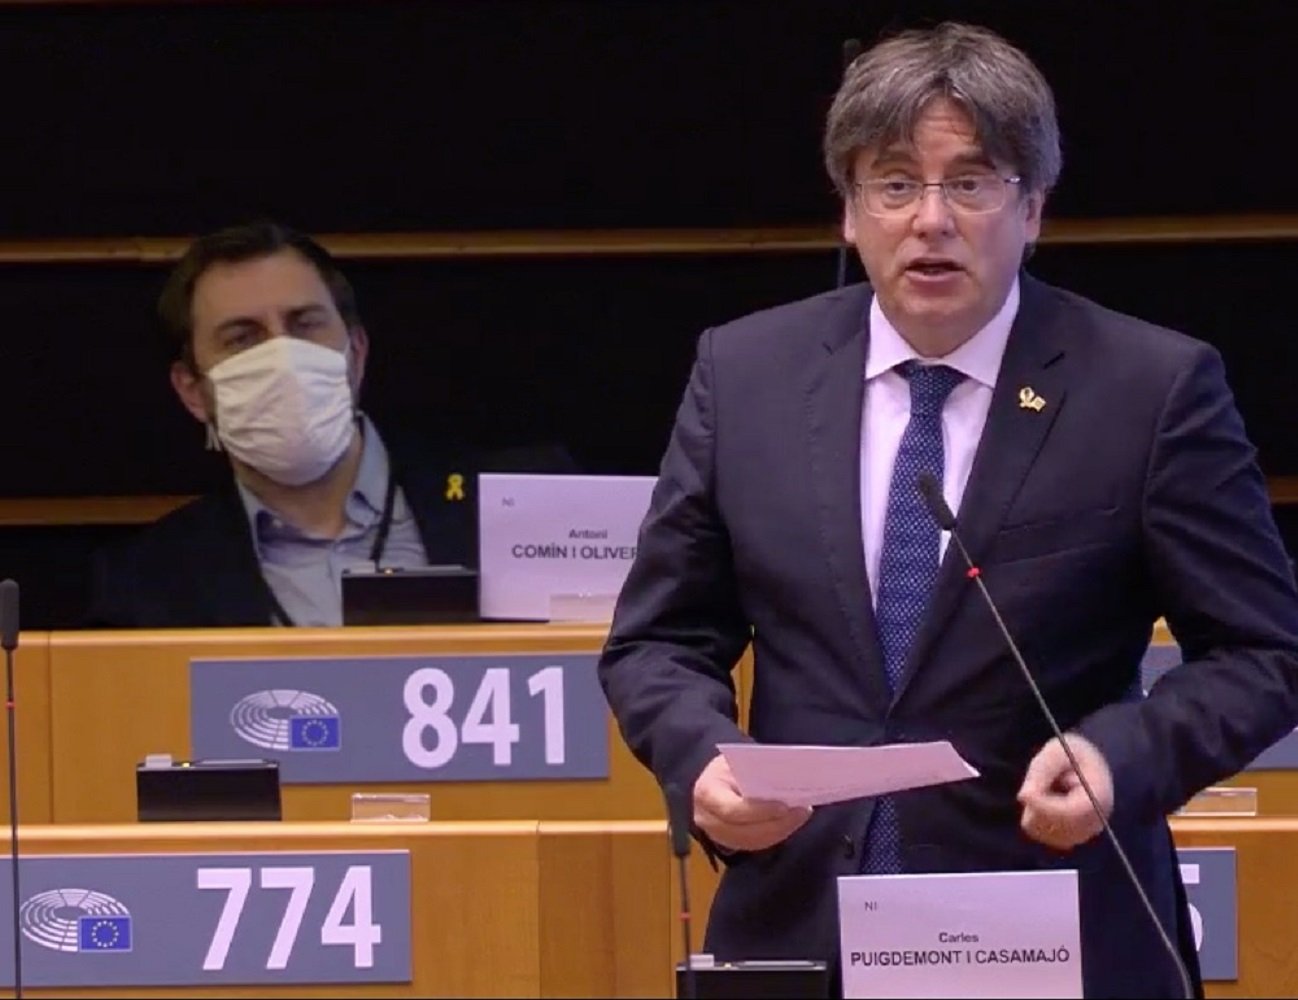 Puigdemont calls on Europe to address human rights abuses in Spain